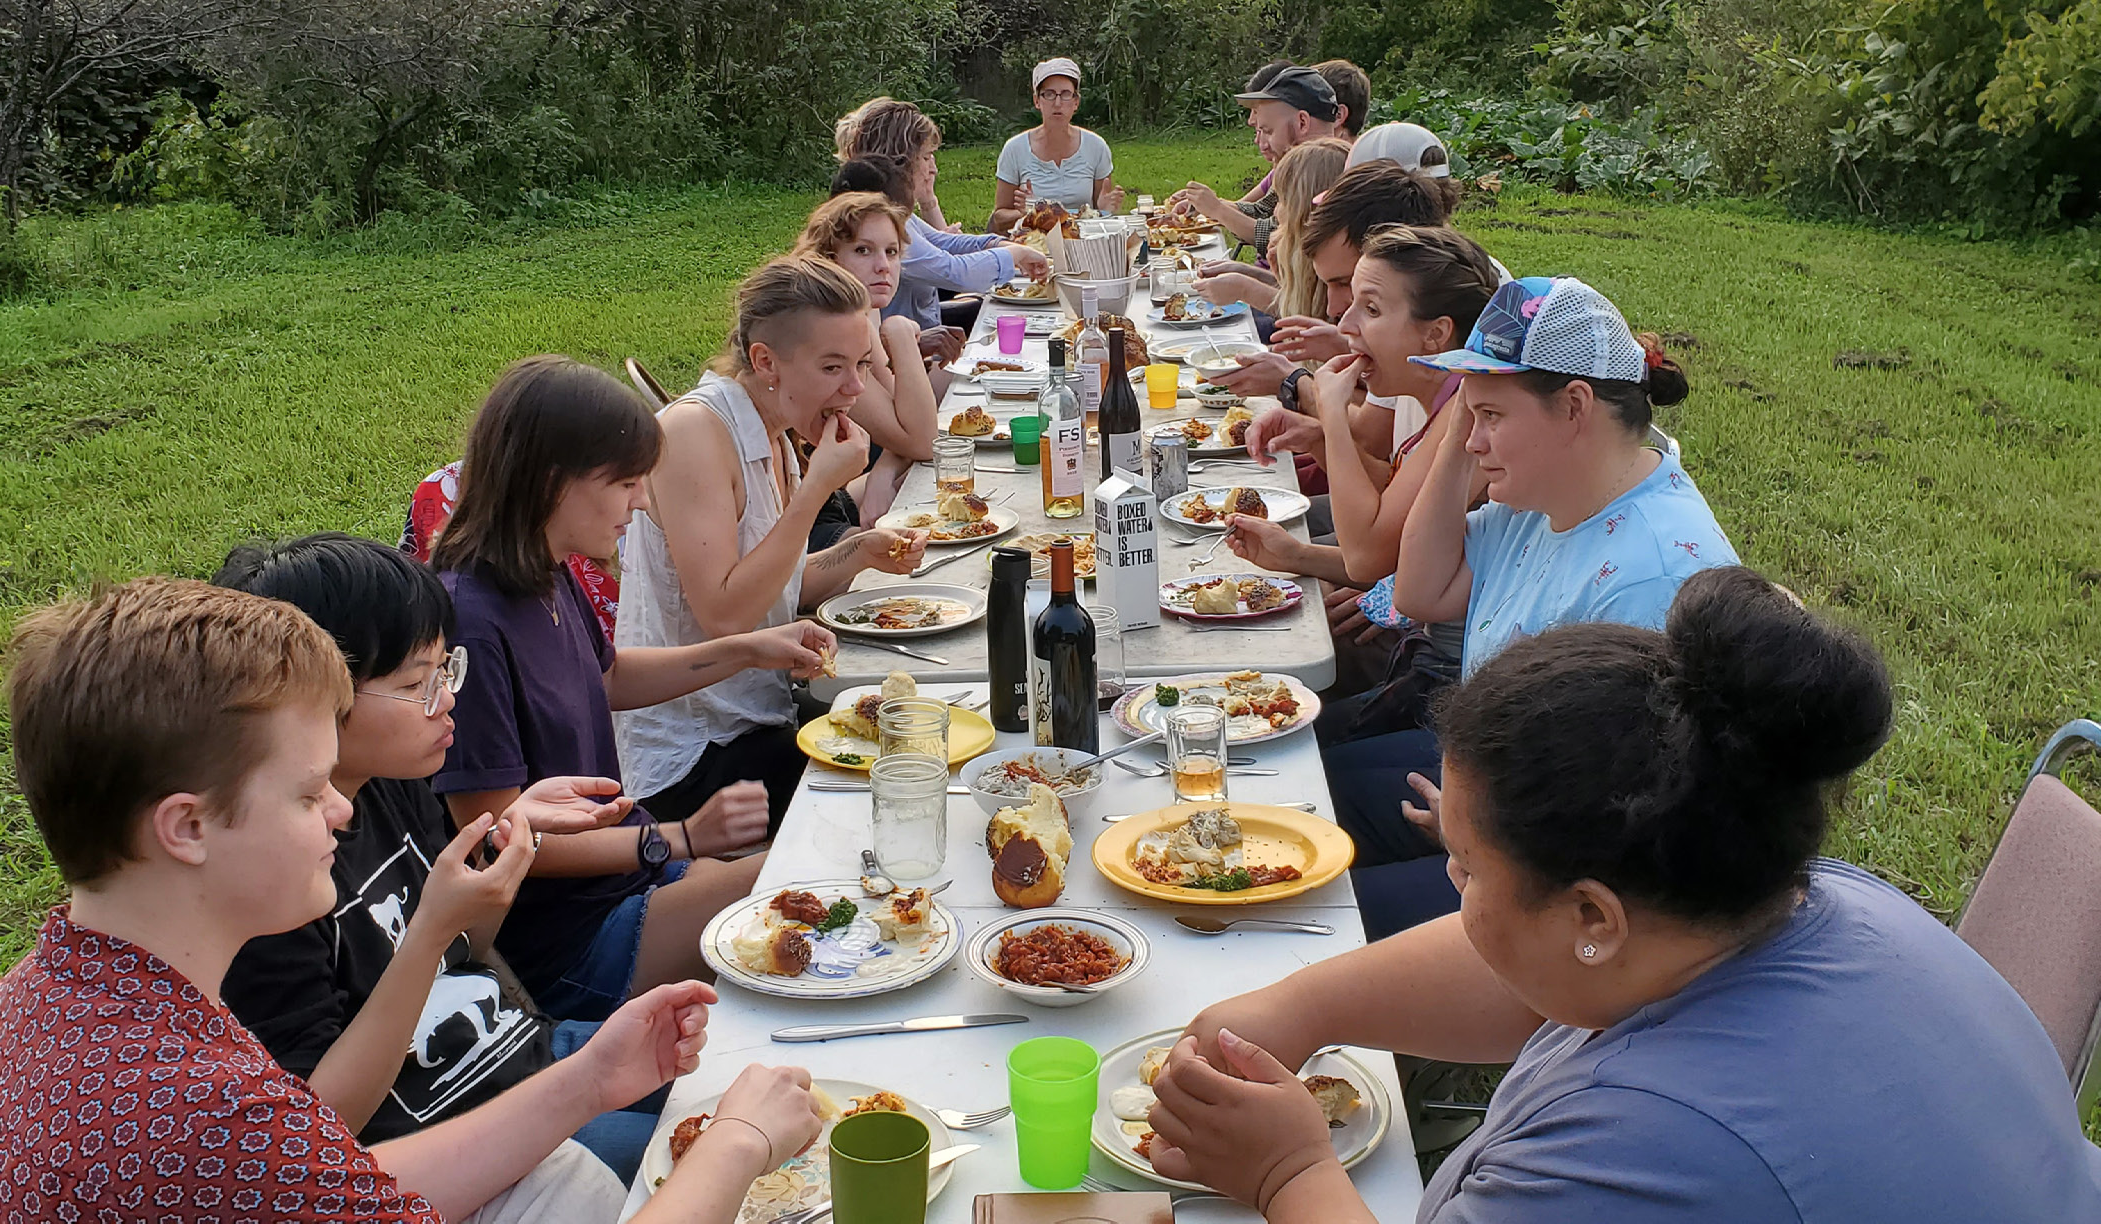 Members of the Mustard Seed Collective gather for a meal.